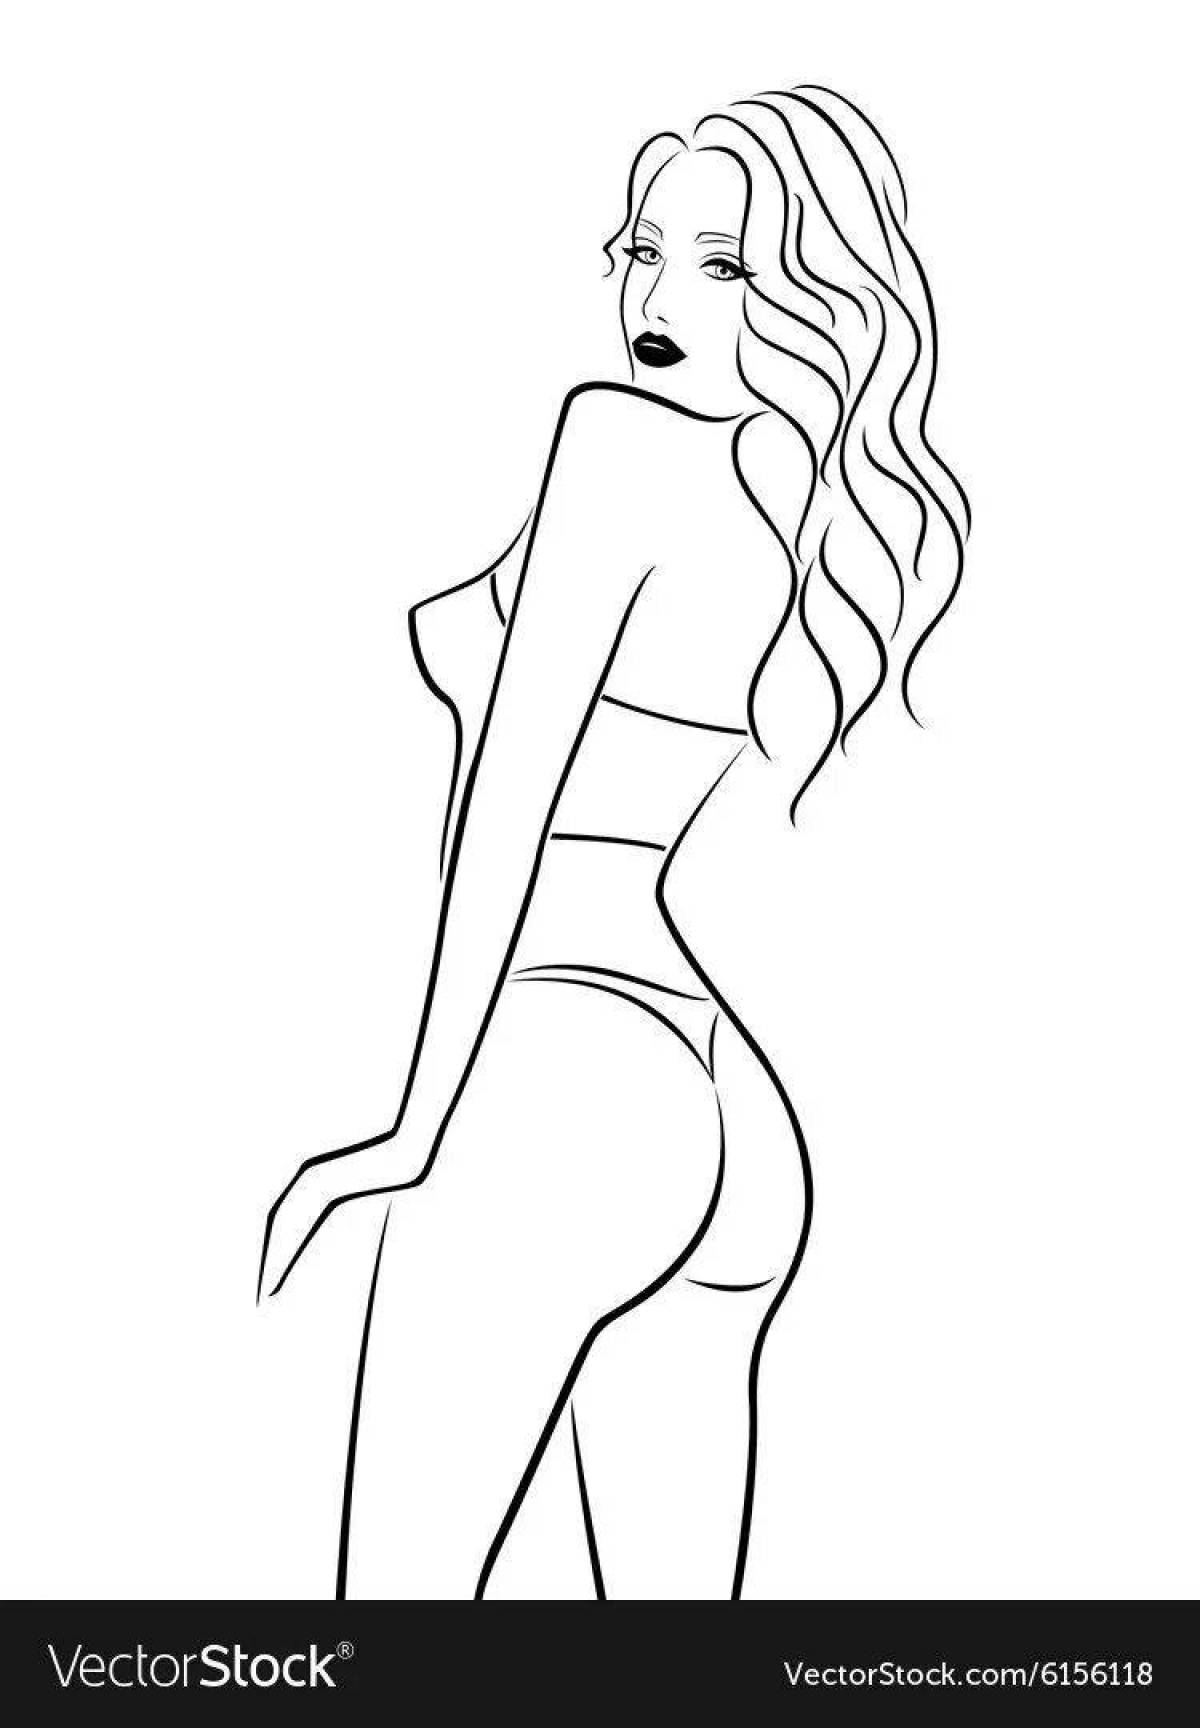 Delightful nude girls coloring pages